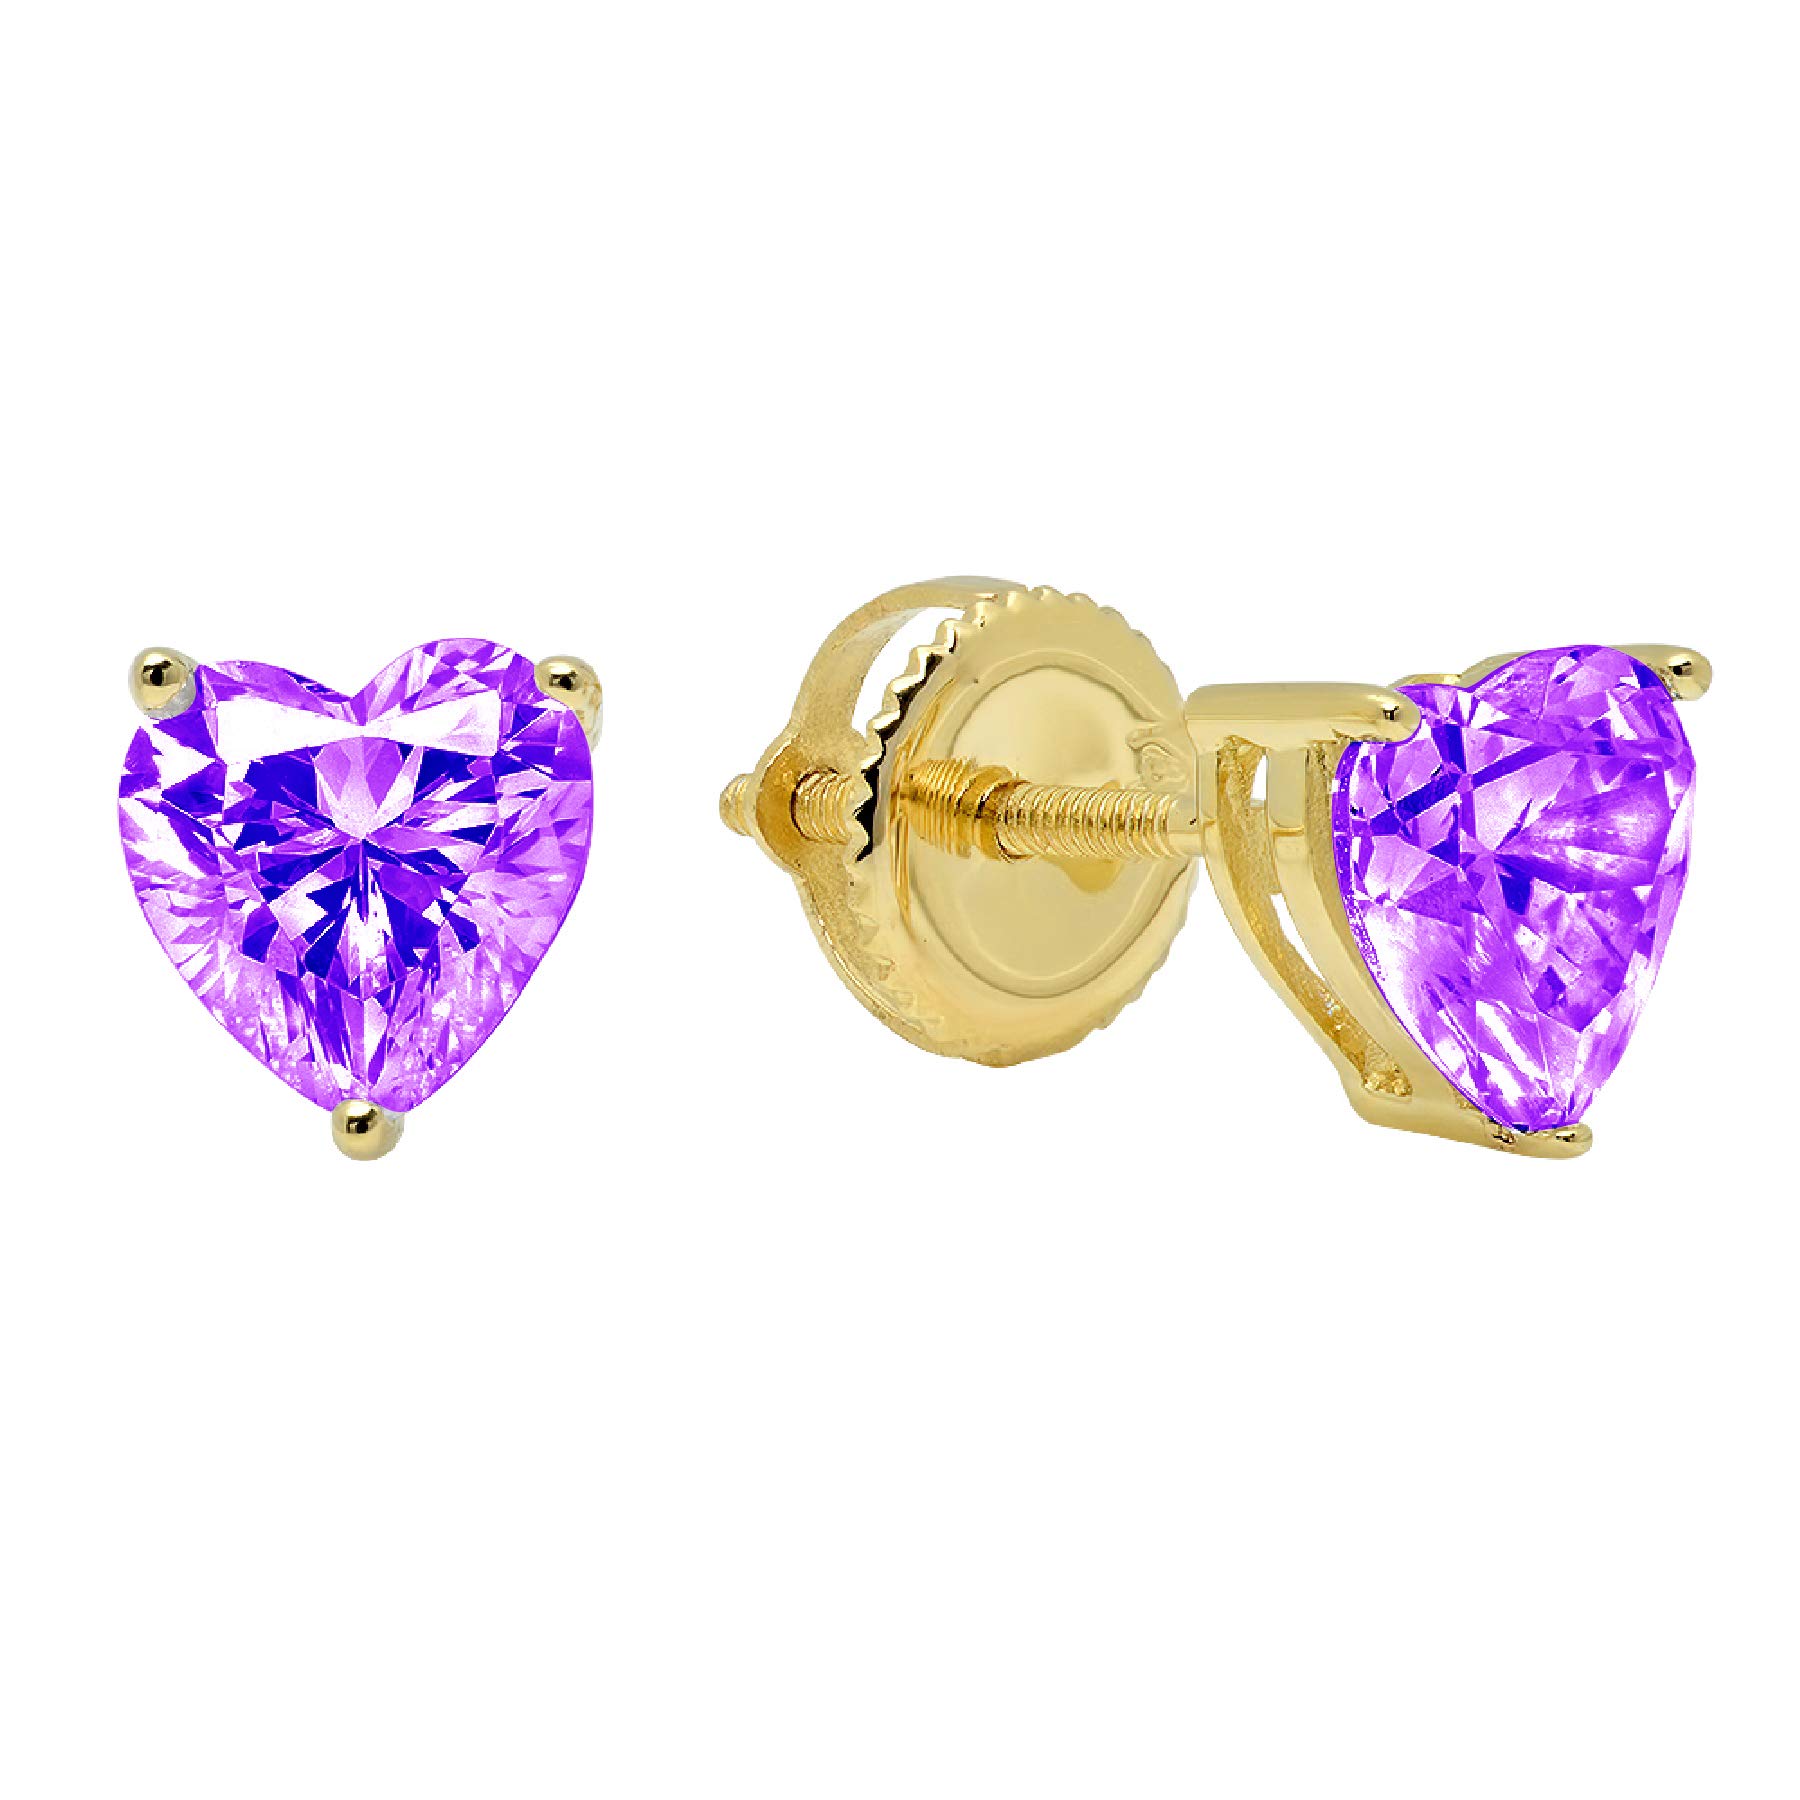 0.9ct Brilliant Heart Cut Solitaire Natural Purple Amethyst gemstone Unisex Designer Stud Earrings Solid 14k Yellow Gold Screw Back conflict free Jewelry